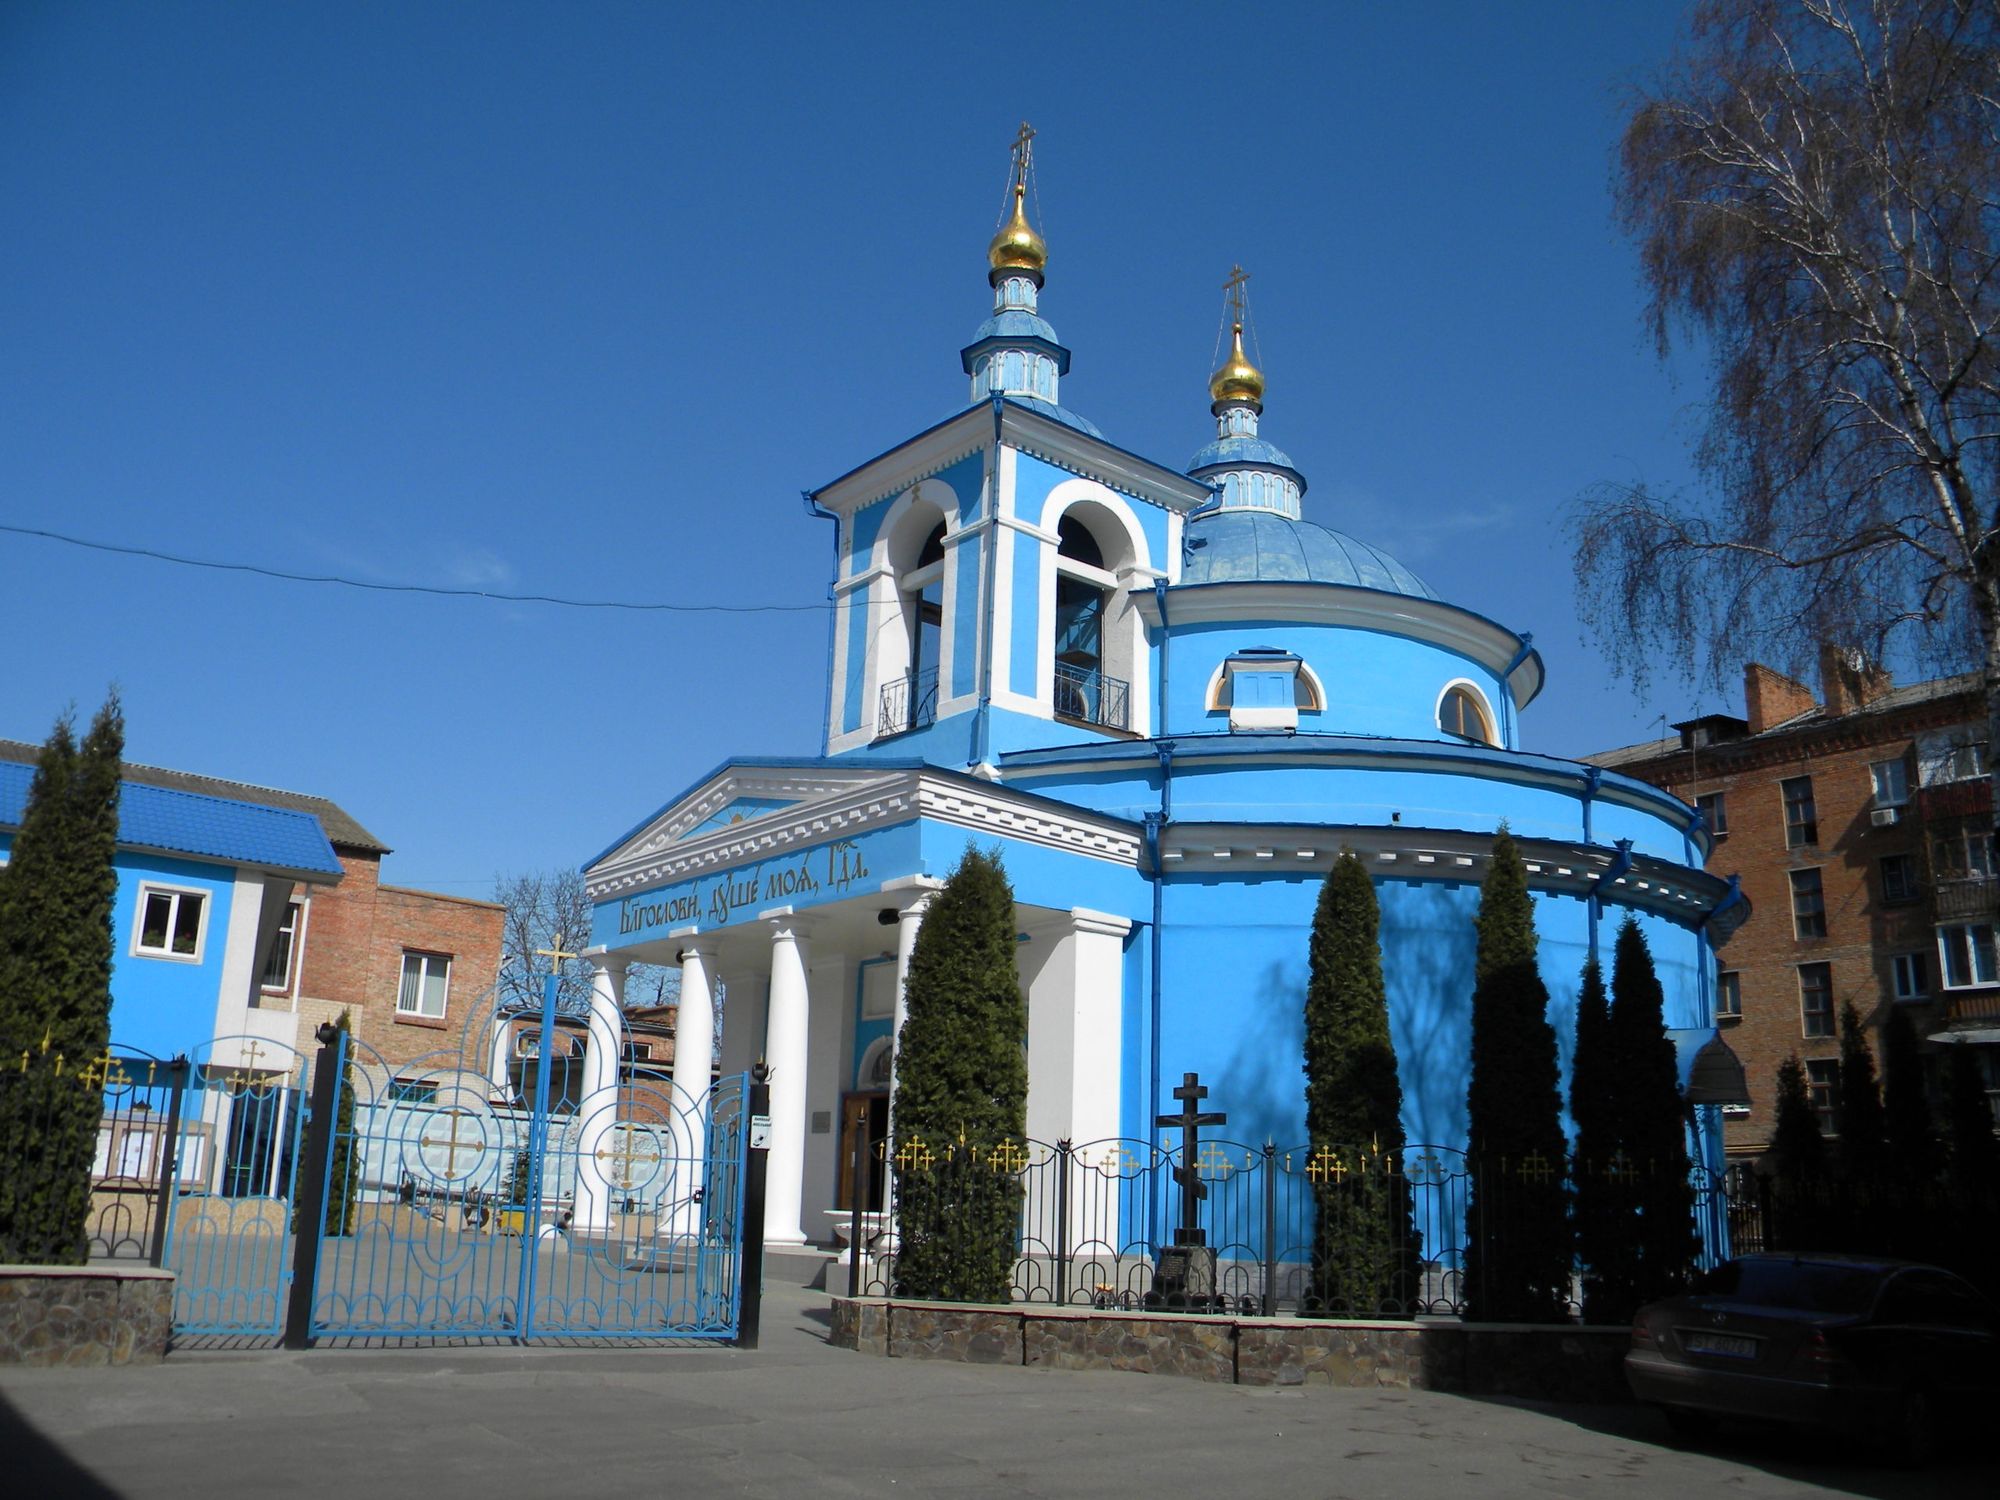 Church of the Nativity of the Blessed Virgin Mary